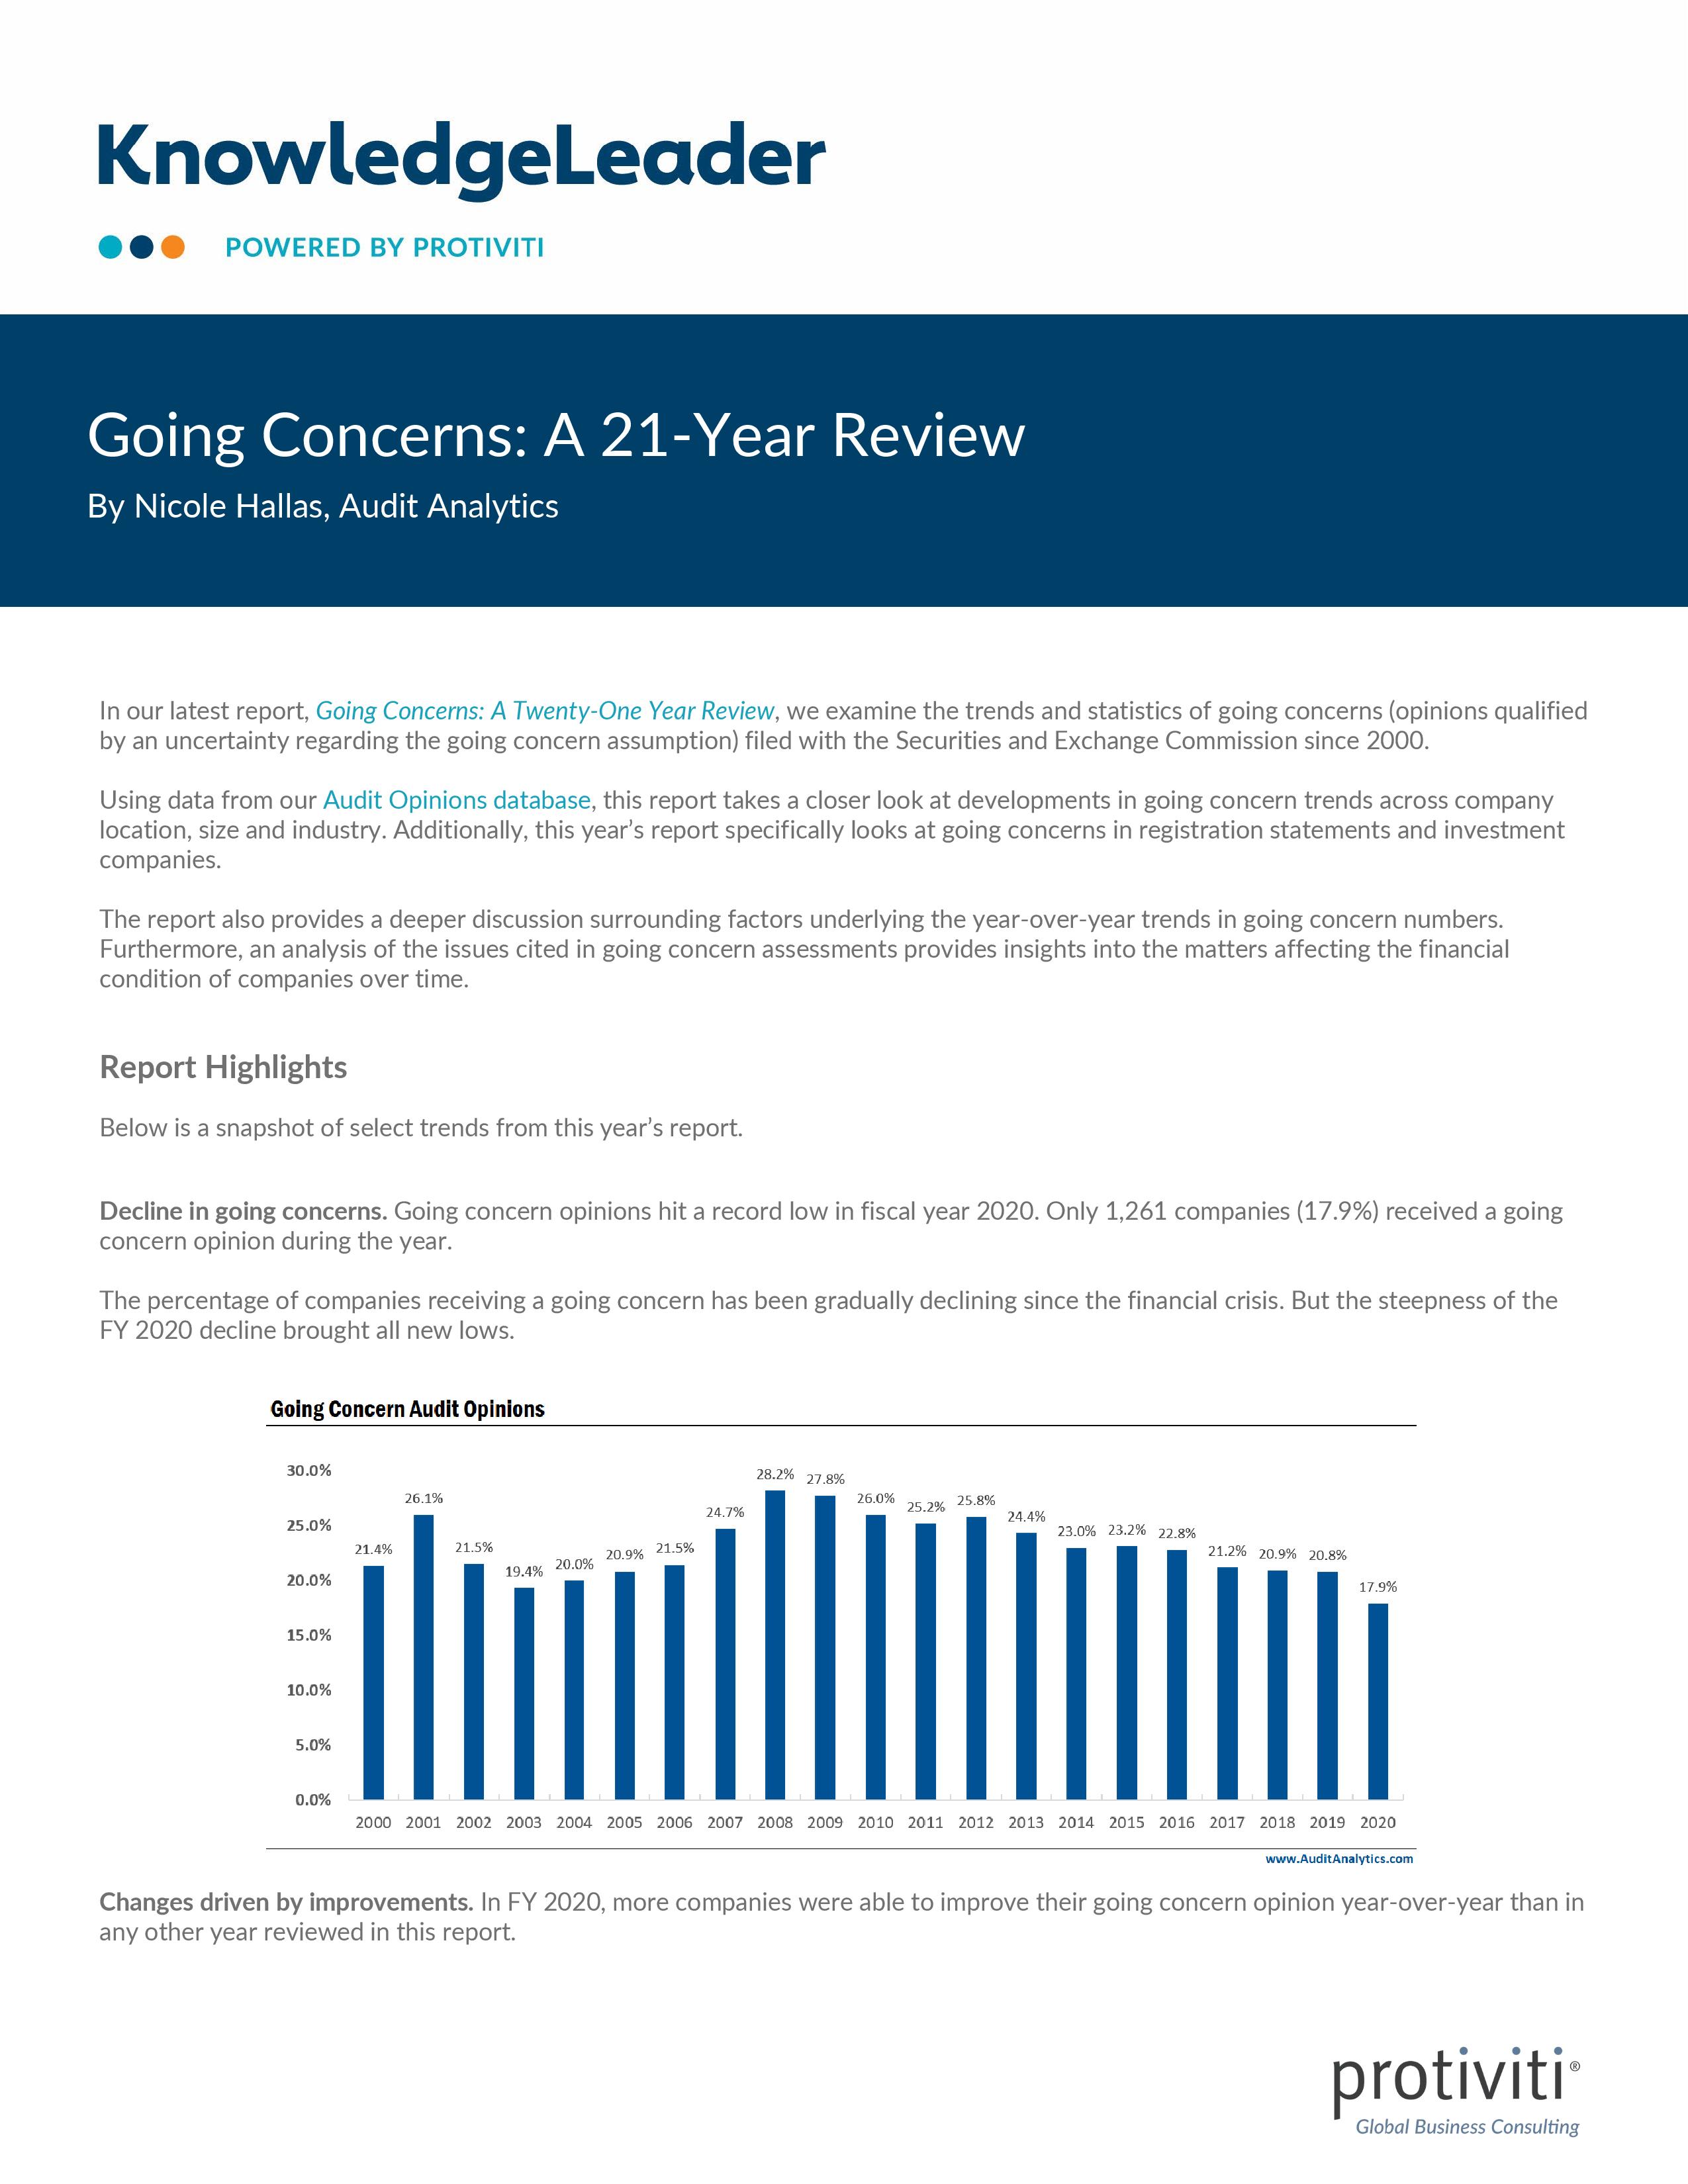 screenshot of the first page of Going Concerns A 21-Year Review